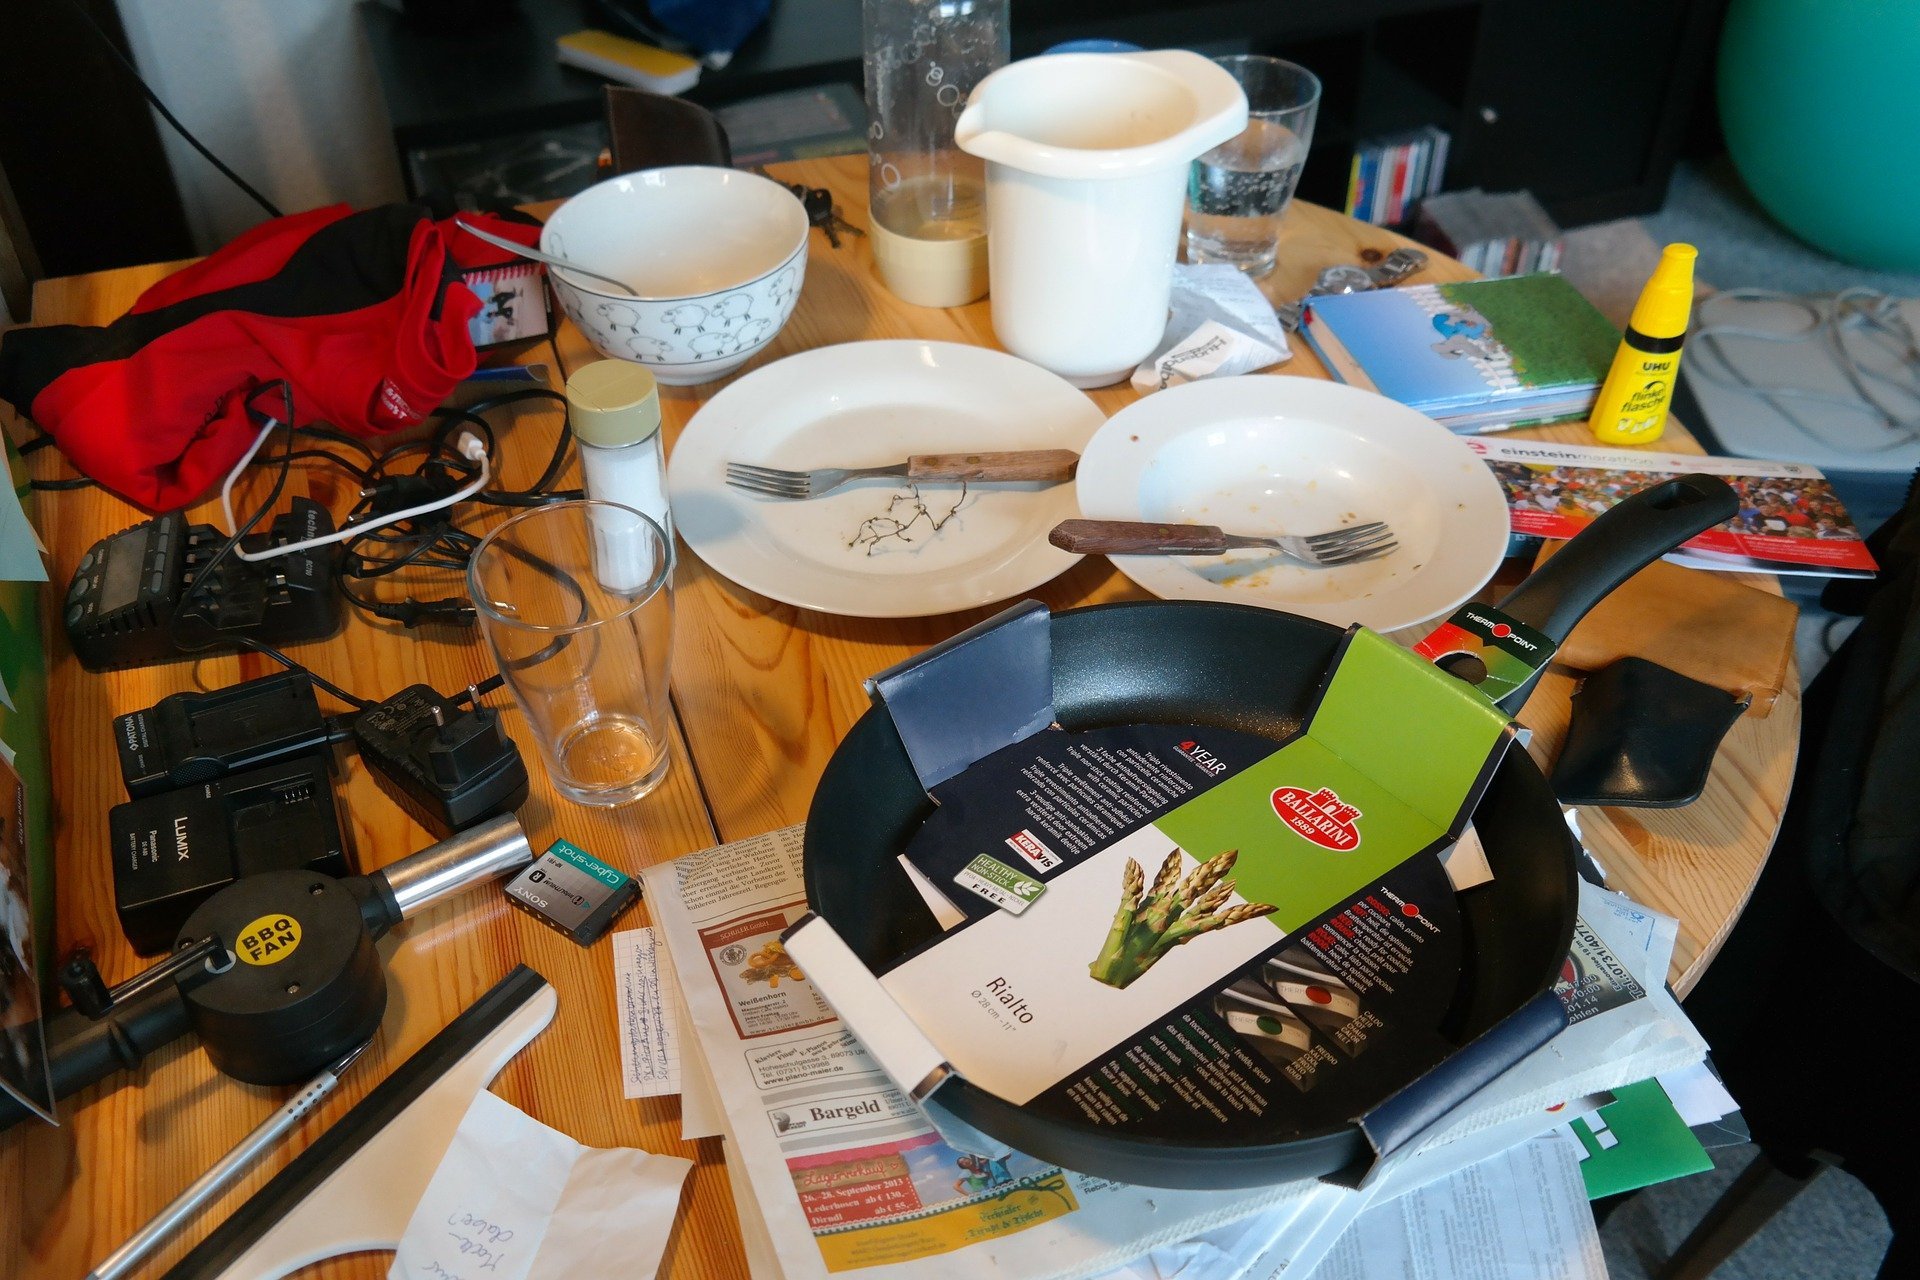 Cluttered mess on the dinner table. | Source: Hans Braxmeier/Pixabay